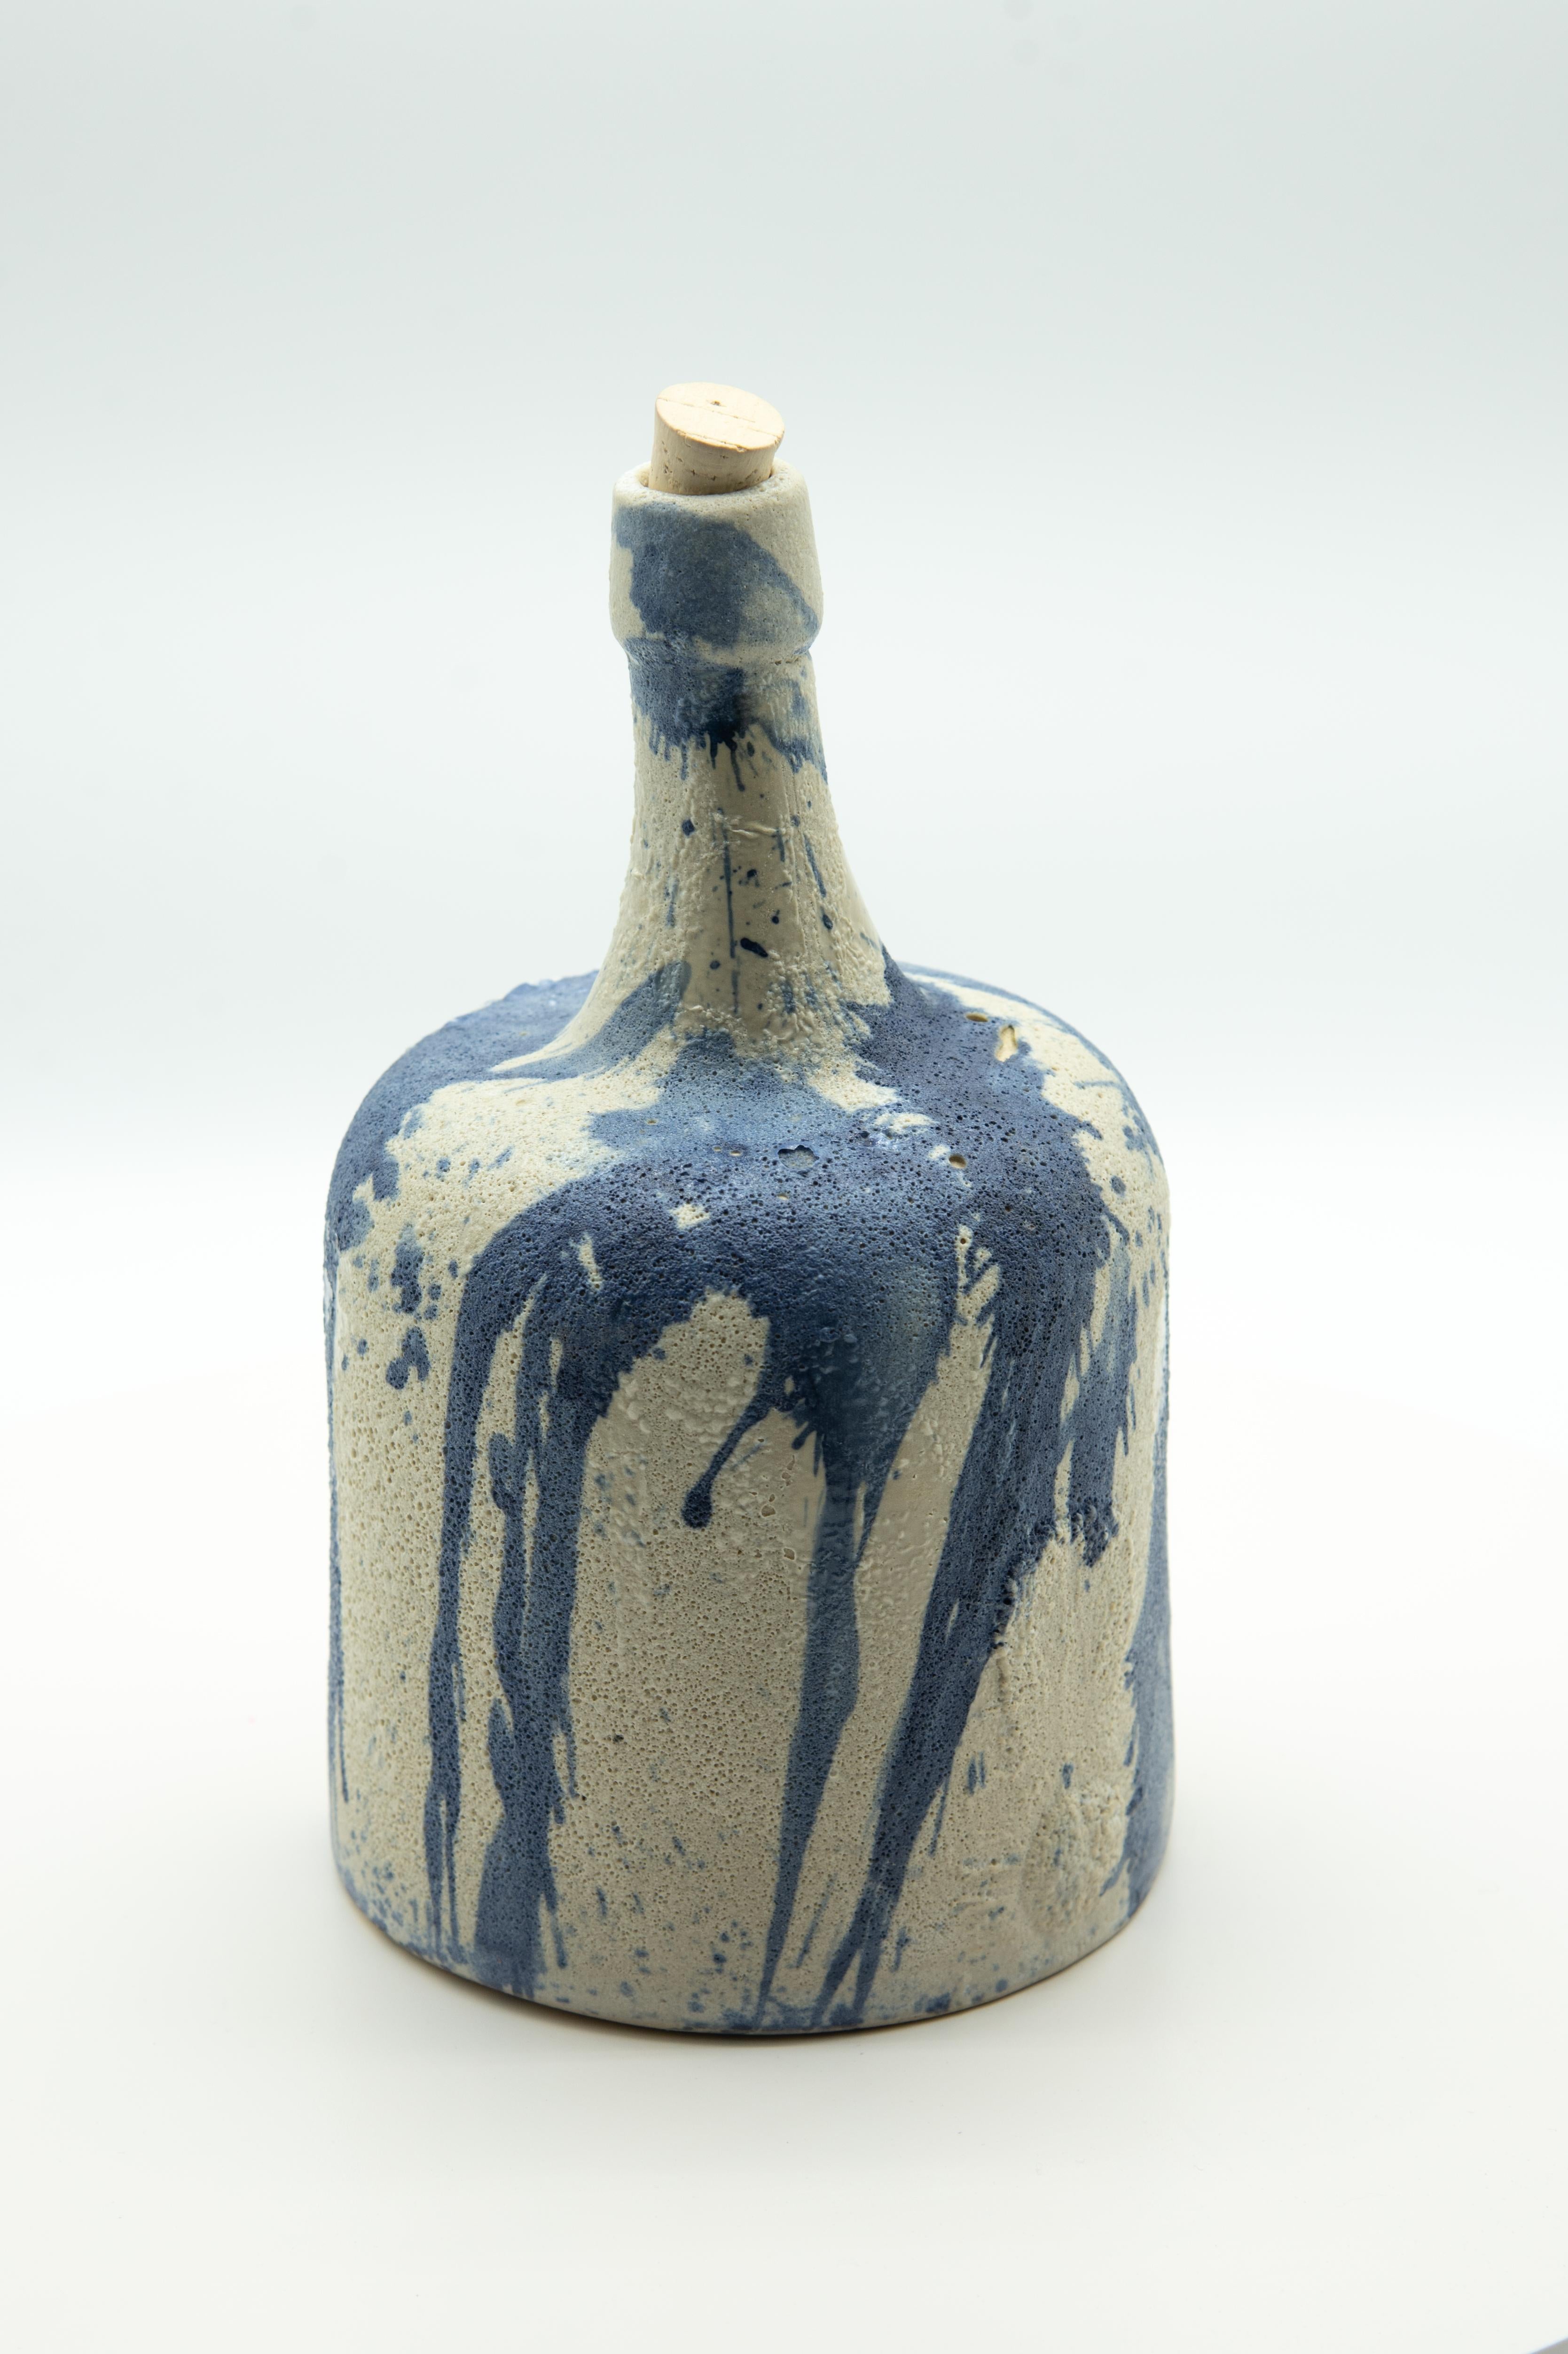 This rustic mezcal bottle is a replica of an antique bottle or demijohn which was used to store mezcal, drunken during folk theaters in Oaxaca, Mexico. The ceramic bottle is painted with cobalt giving it its striking blue tone and stained effect. 